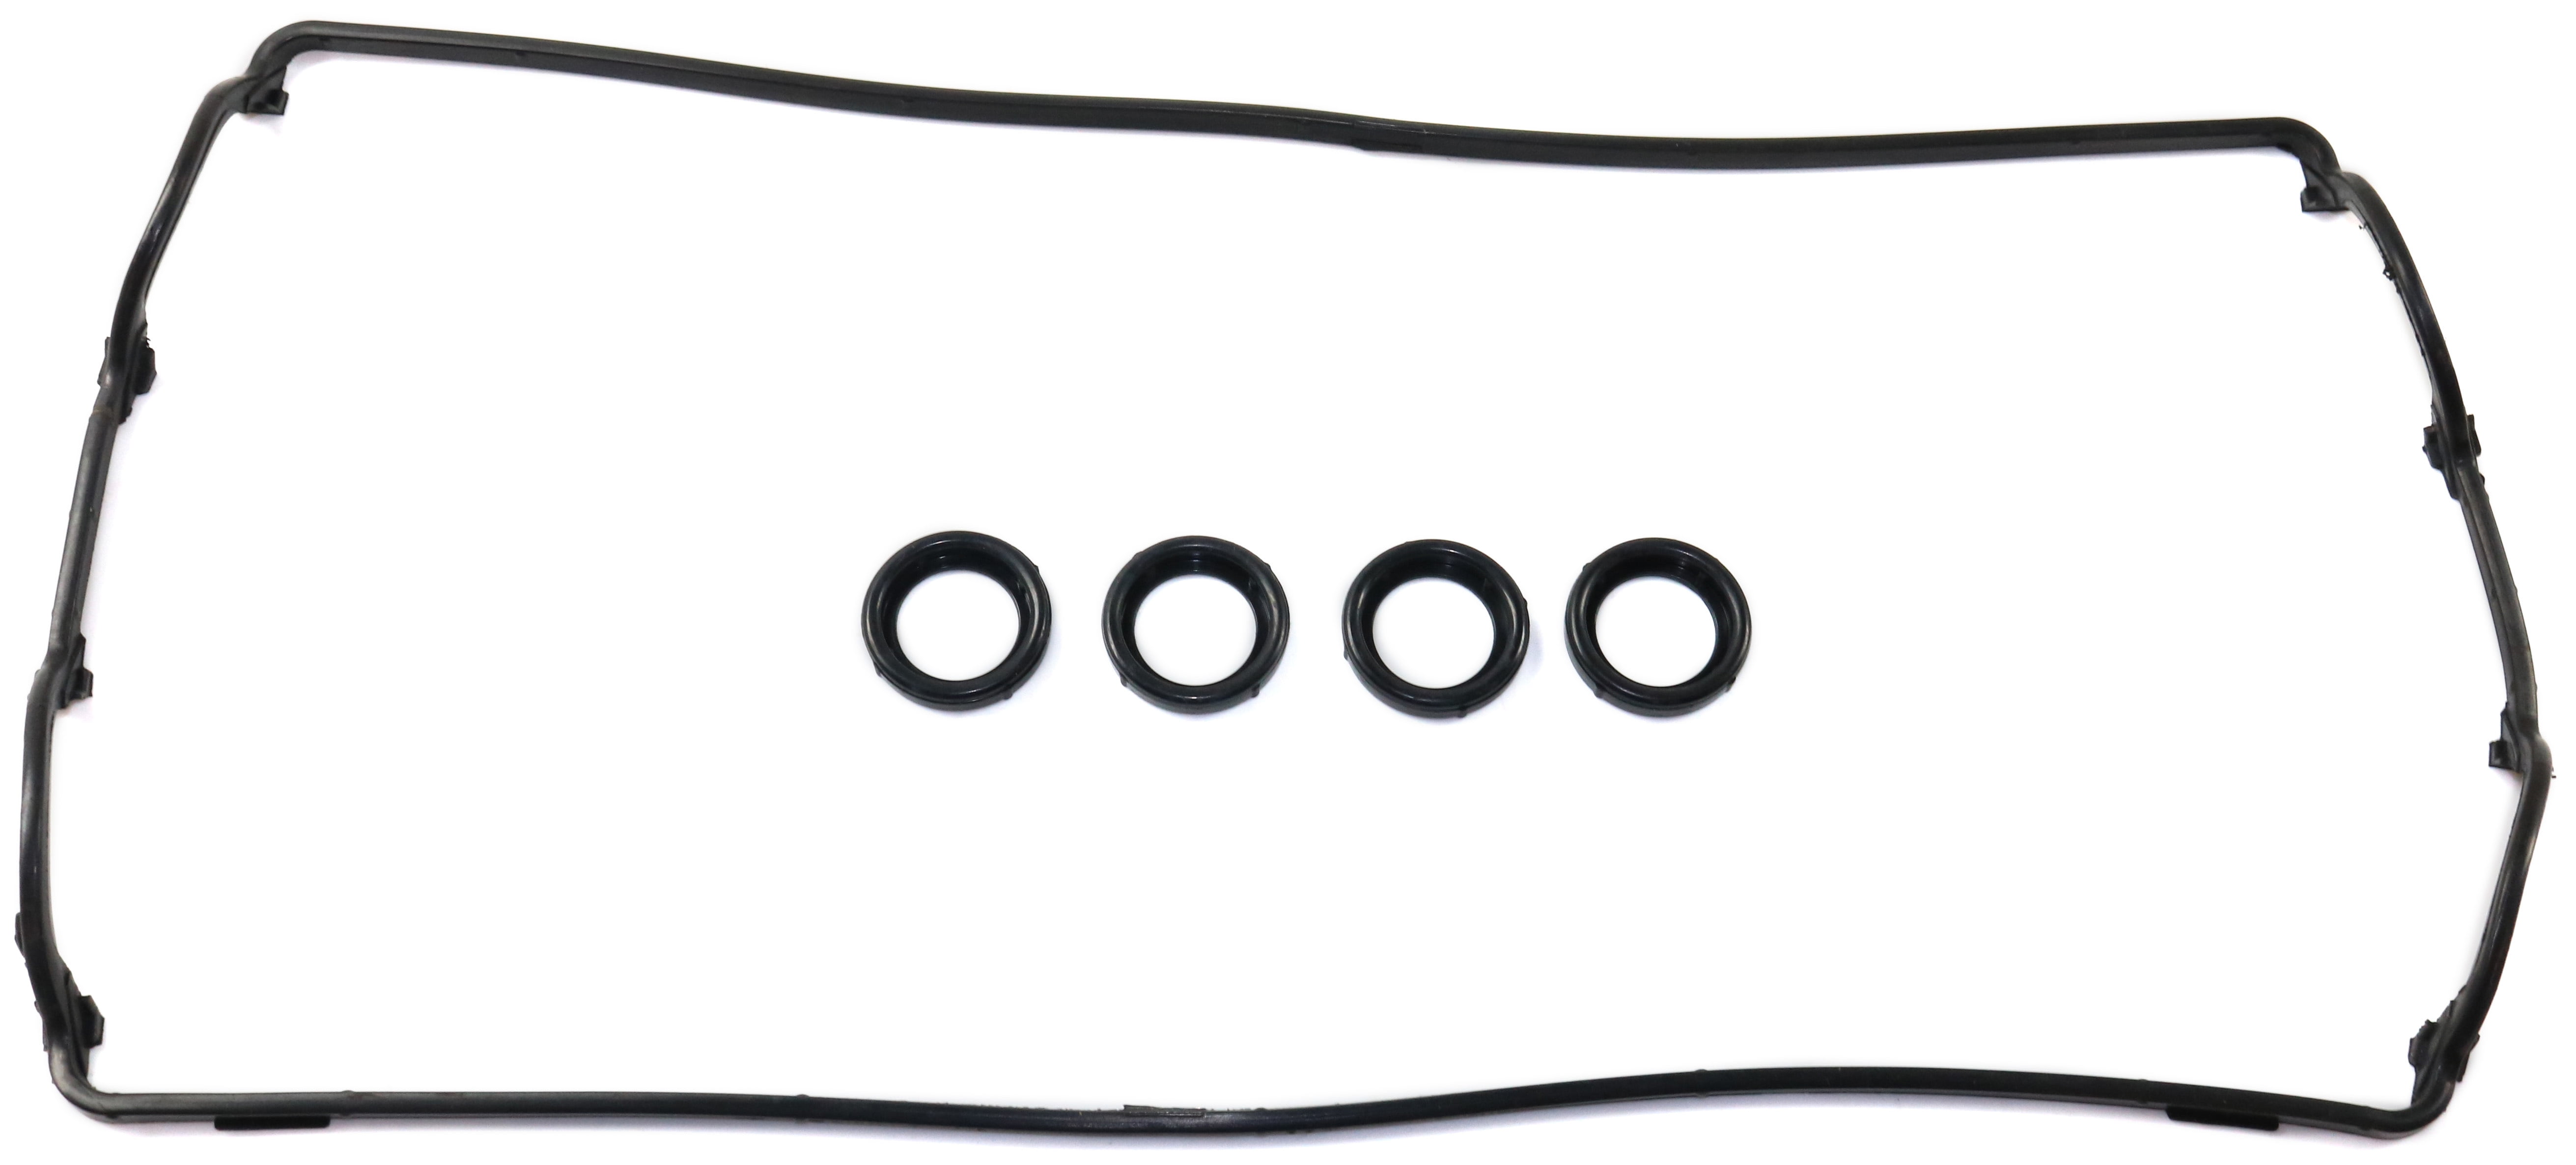 Engine Valve Cover Gasket Set Left,Right Compatible With Lexus - 4